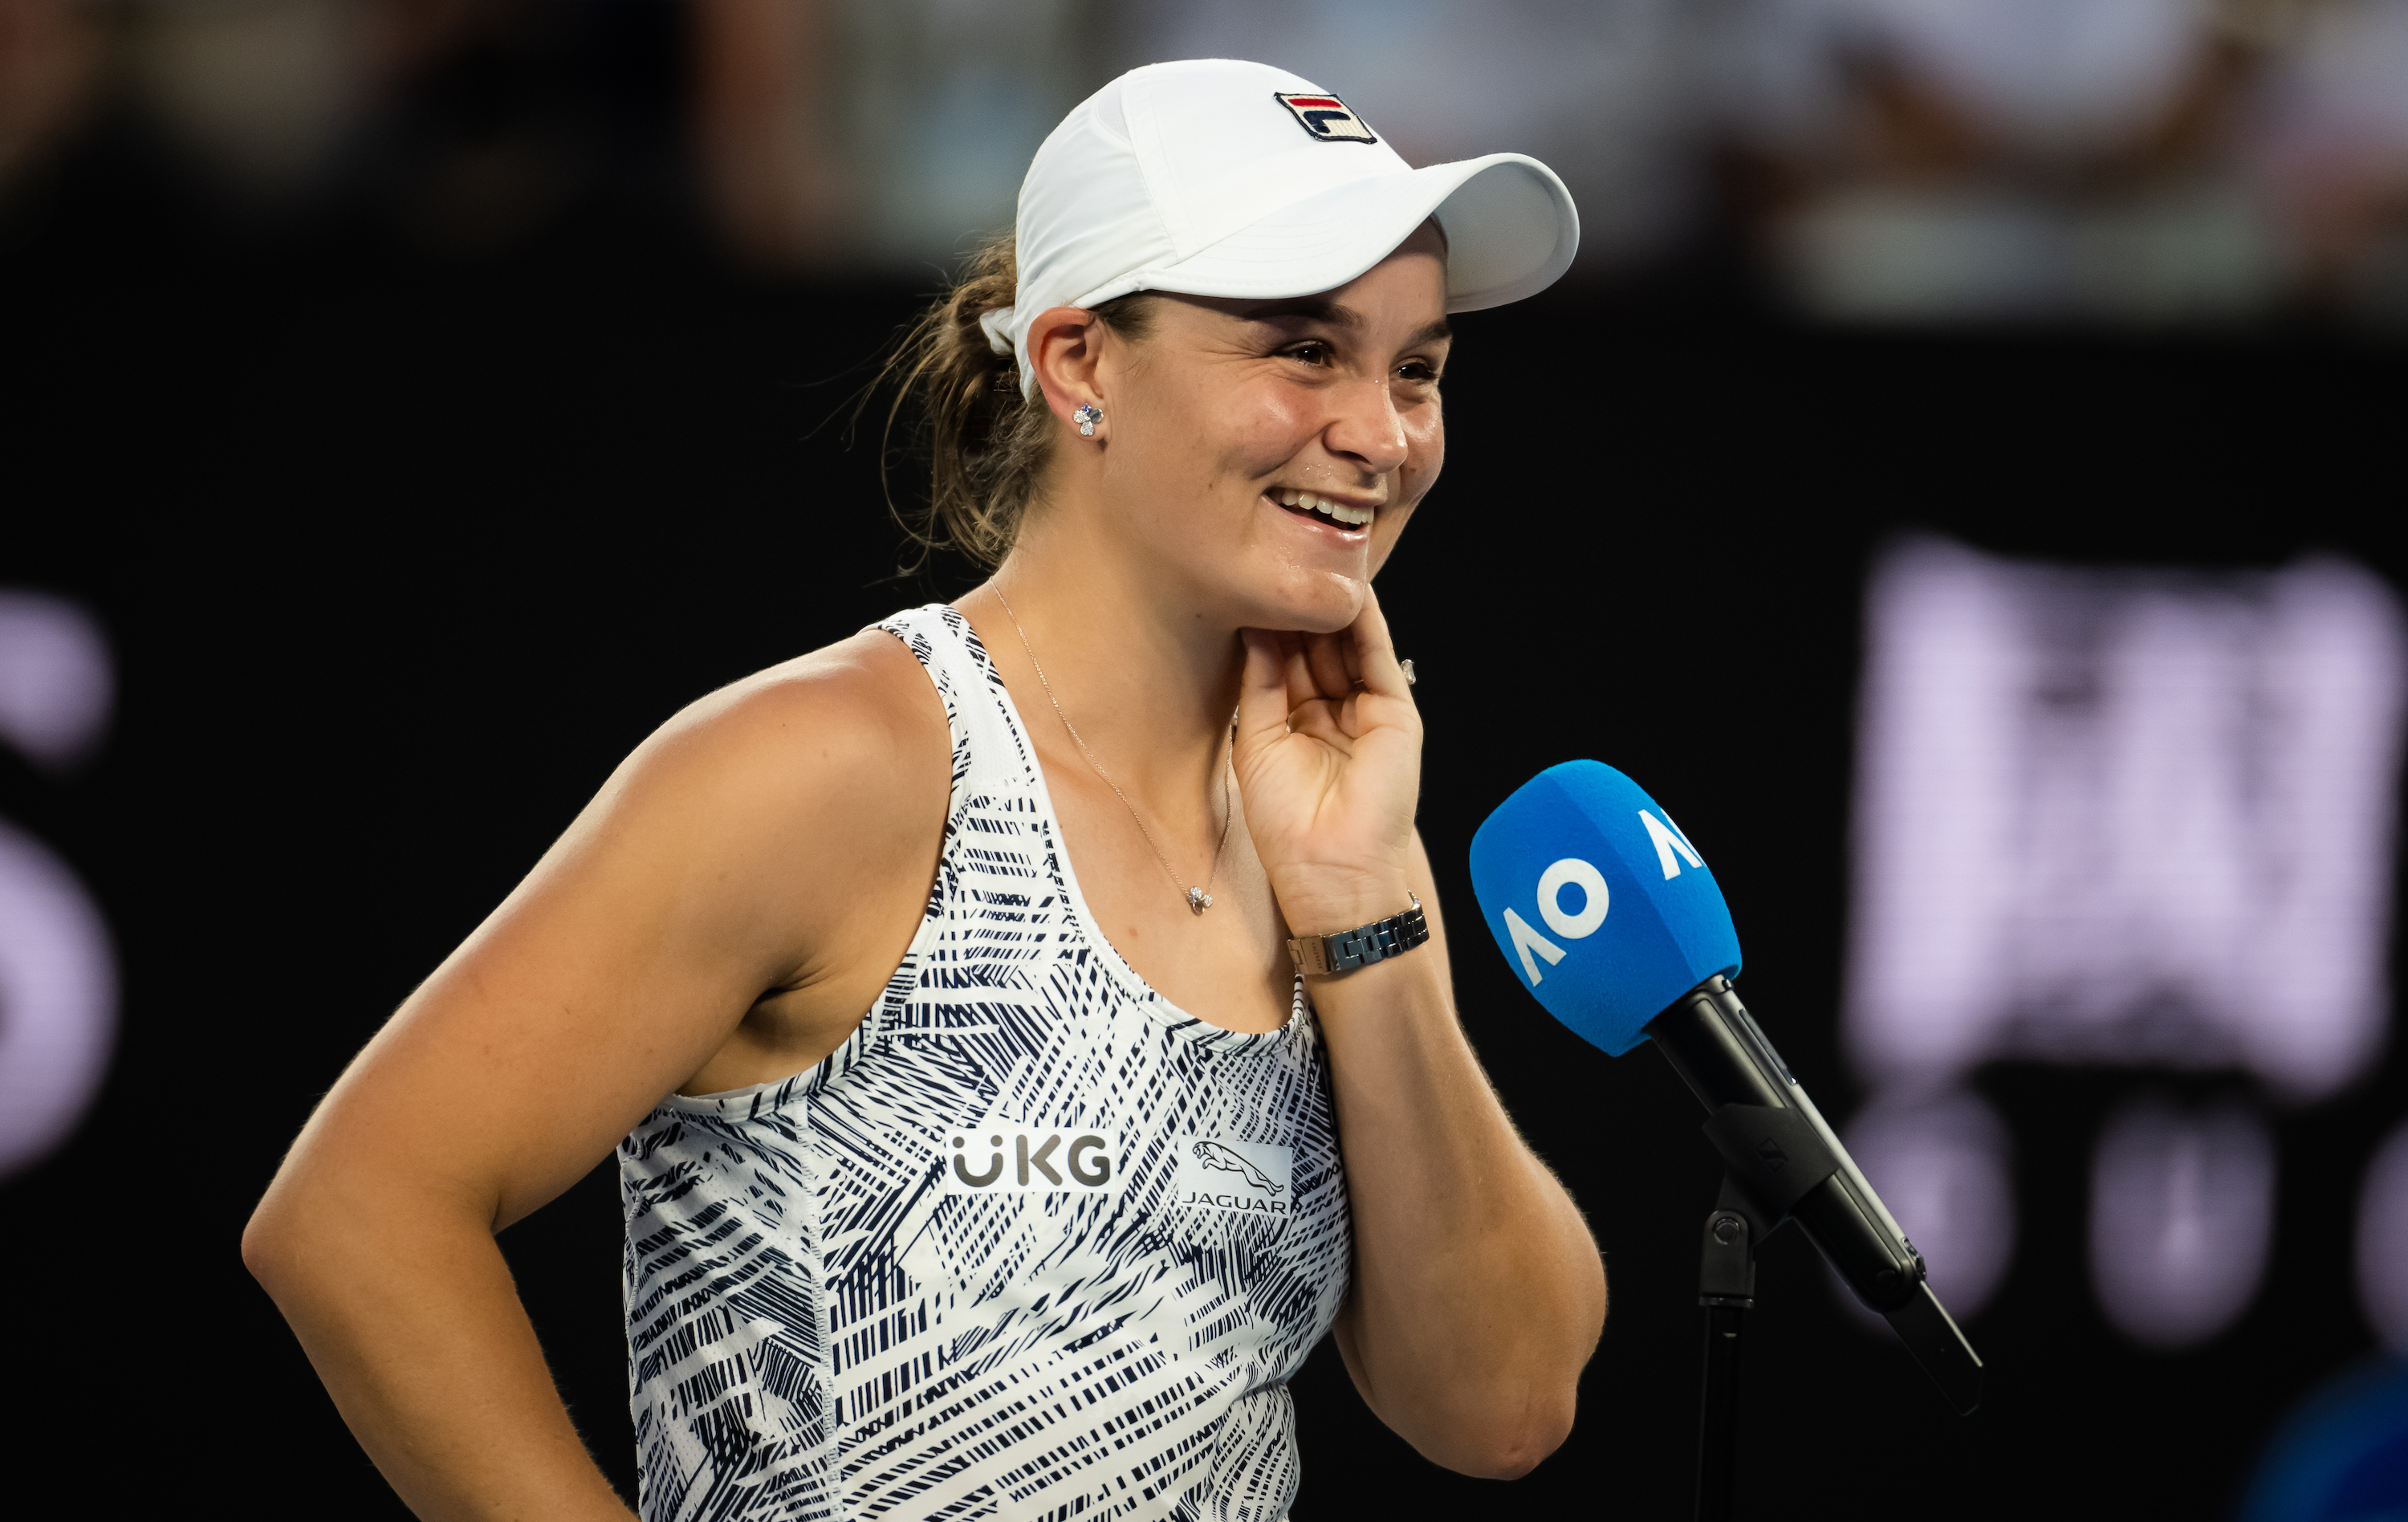 Barty vs Keys LIVE: In search of maiden Aus Open title, Ashleigh Barty geared up for tough Madison Keys challenge semifinals - Follow LIVE updates